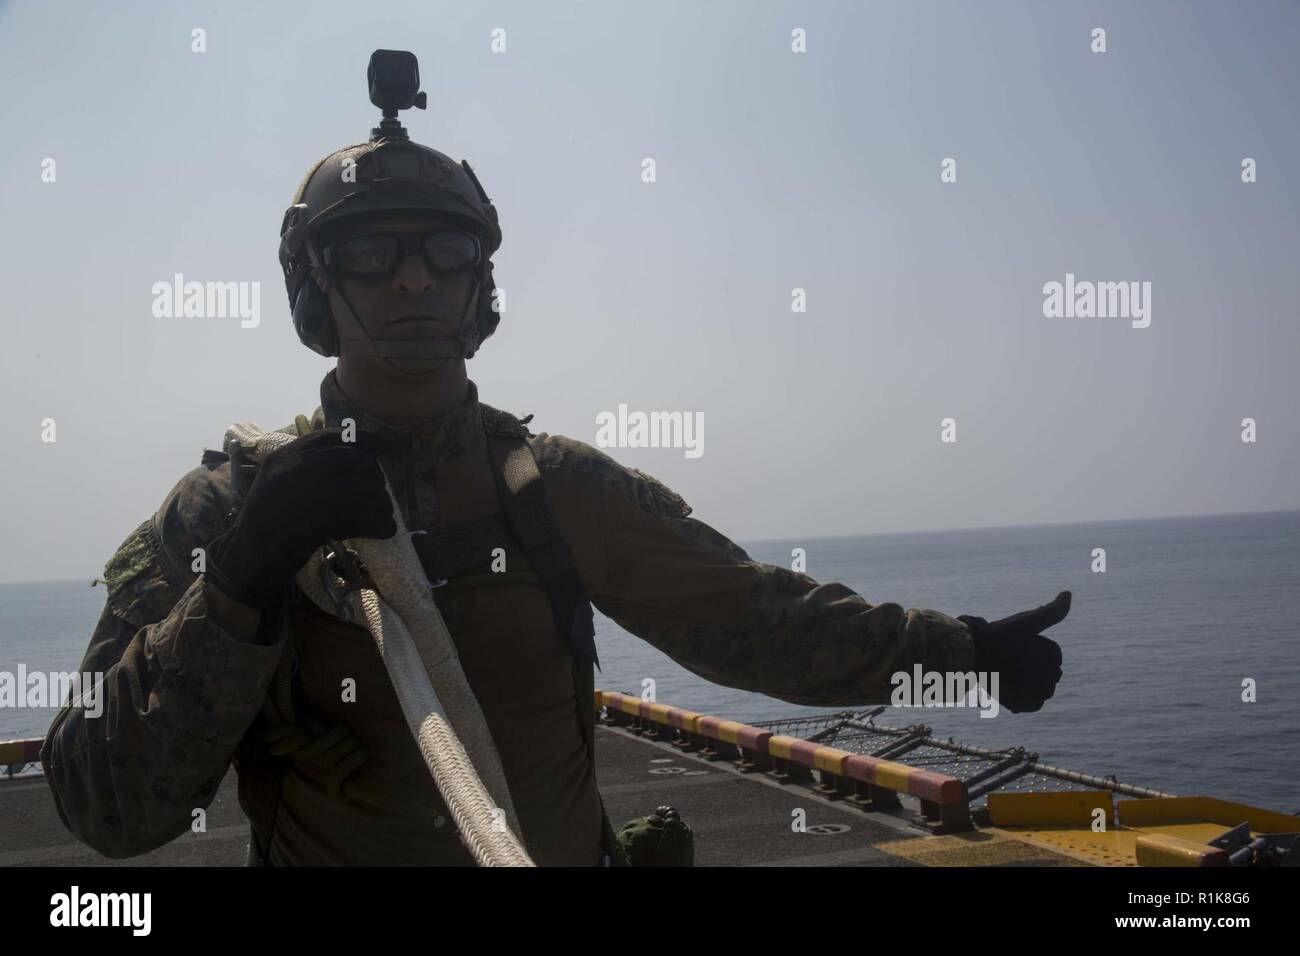 Gunnery Sgt. Jesus Cisneros Jr., the platoon sergeant for the 31st Marine Expeditionary Unit’s Amphibious Reconnaissance Platoon, attaches to a line during Special Patrol Insertion and Extraction training aboard the amphibious assault ship USS Wasp (LHD 1), underway in the South China Sea, Oct. 11, 2018. Cisneros, a native of Lake Station, Indiana, graduated River Forest High School in May 1997 and enlisted in January 2004. SPIE rigging allows Marines to enter and exit tactical landing zones that are inaccessible to helicopters during amphibious operations. The Seahawk belongs to Helicopter Se Stock Photo